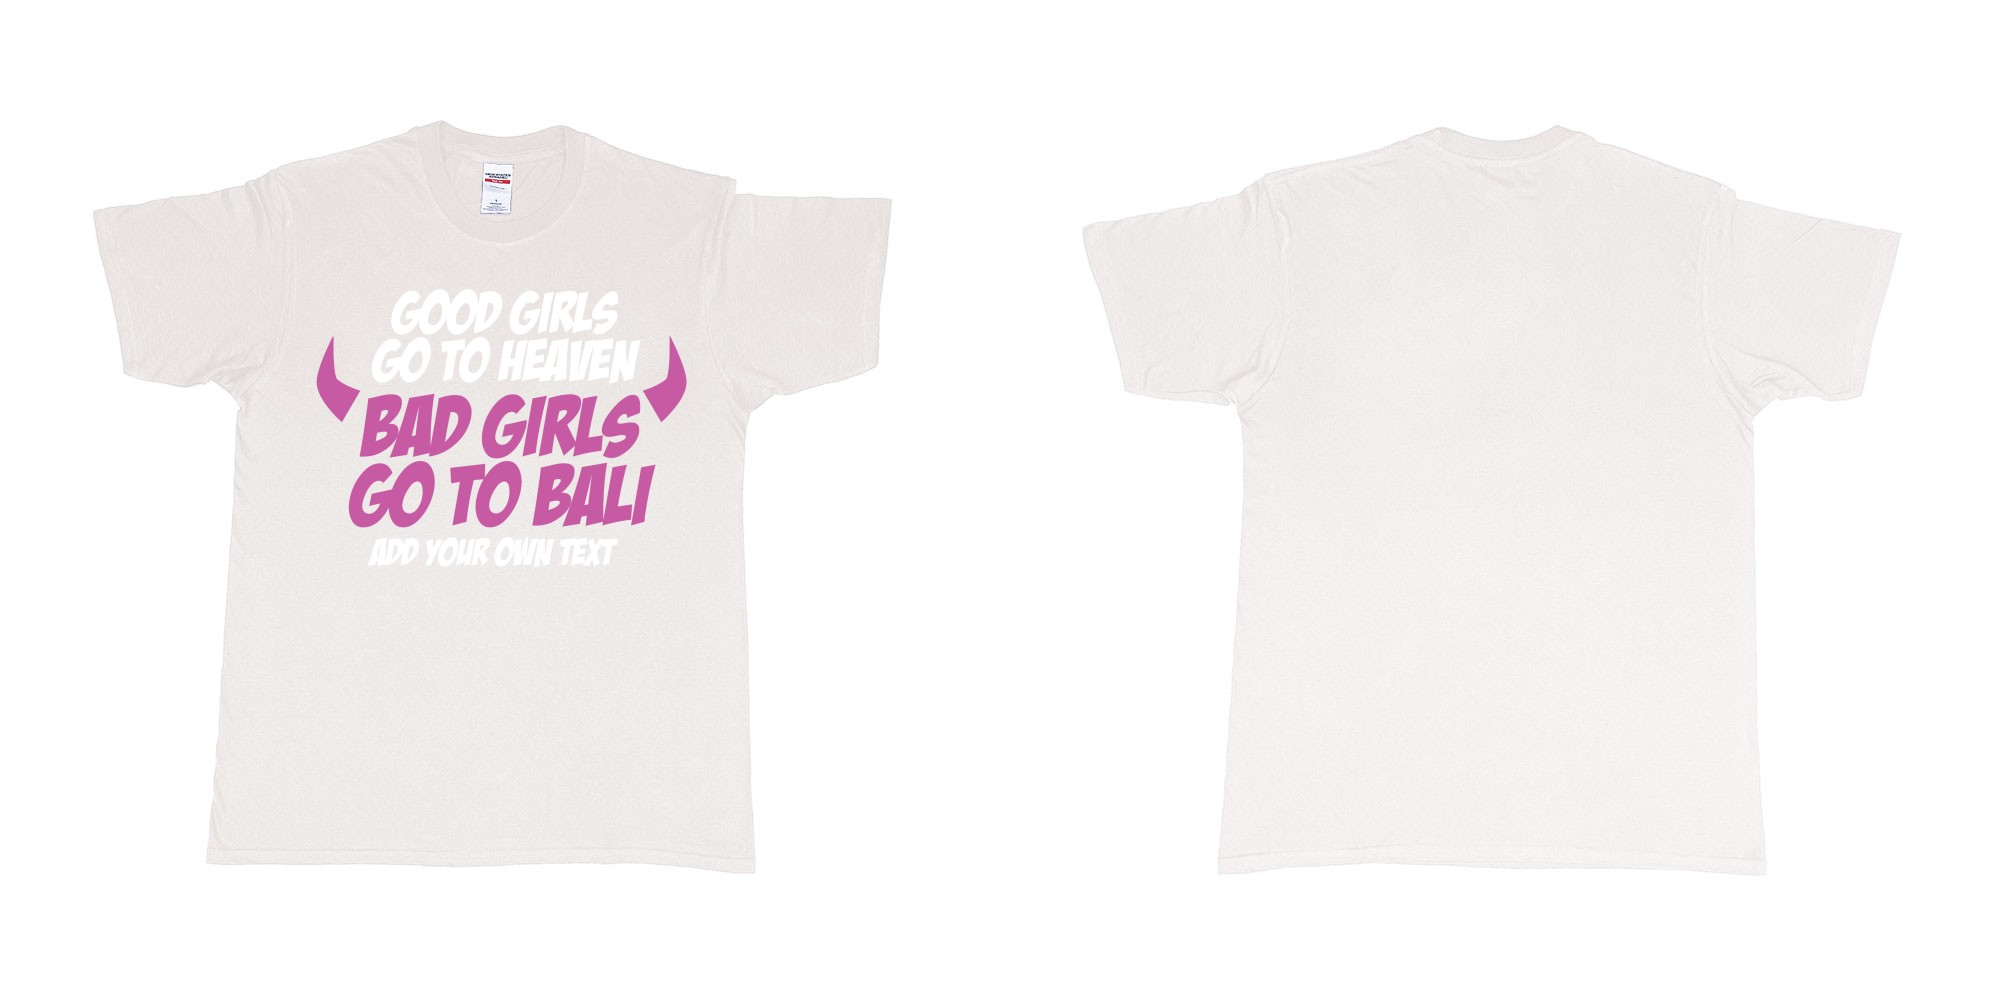 Custom tshirt design good girls go to heaven bad girls go to bali in fabric color white choice your own text made in Bali by The Pirate Way